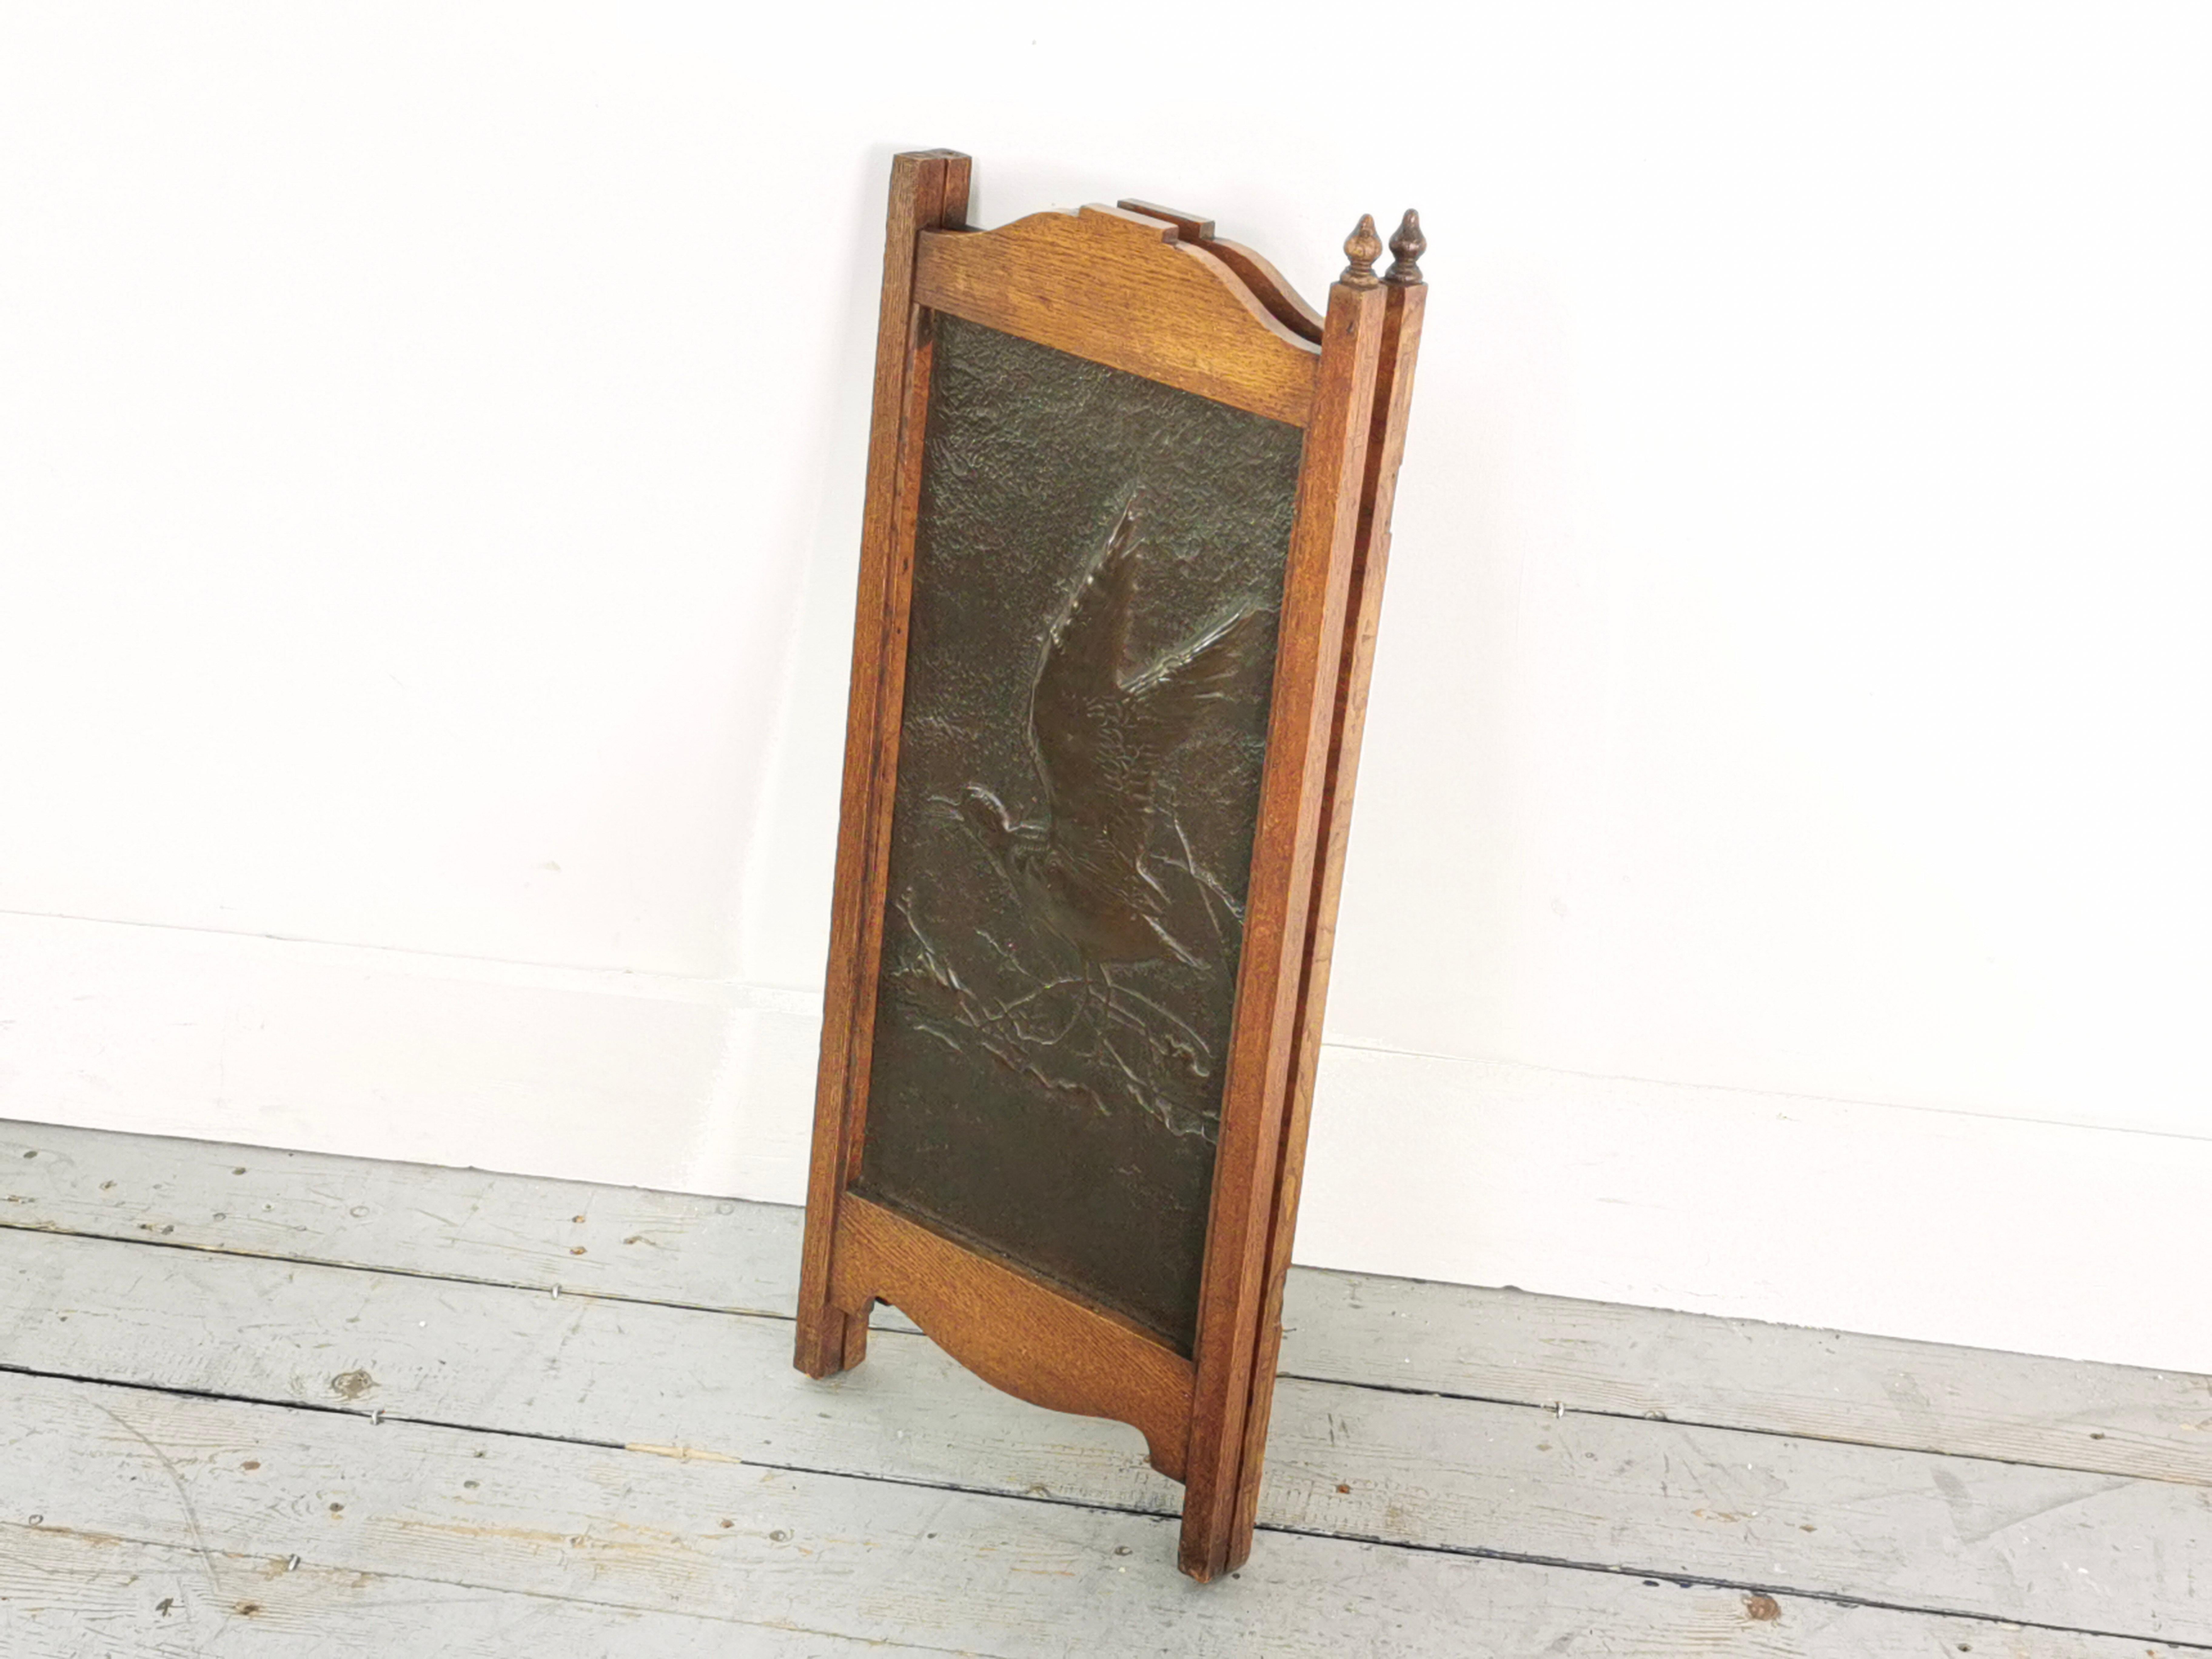 Arts & Crafts fire guard

A two-panel (initially three) arts and crafts fire guard constructed from solid oak with brass inserts.

Highly decorative item, with brass inserts displaying birds. Hinged for storage.

Circa 1900.

Very good